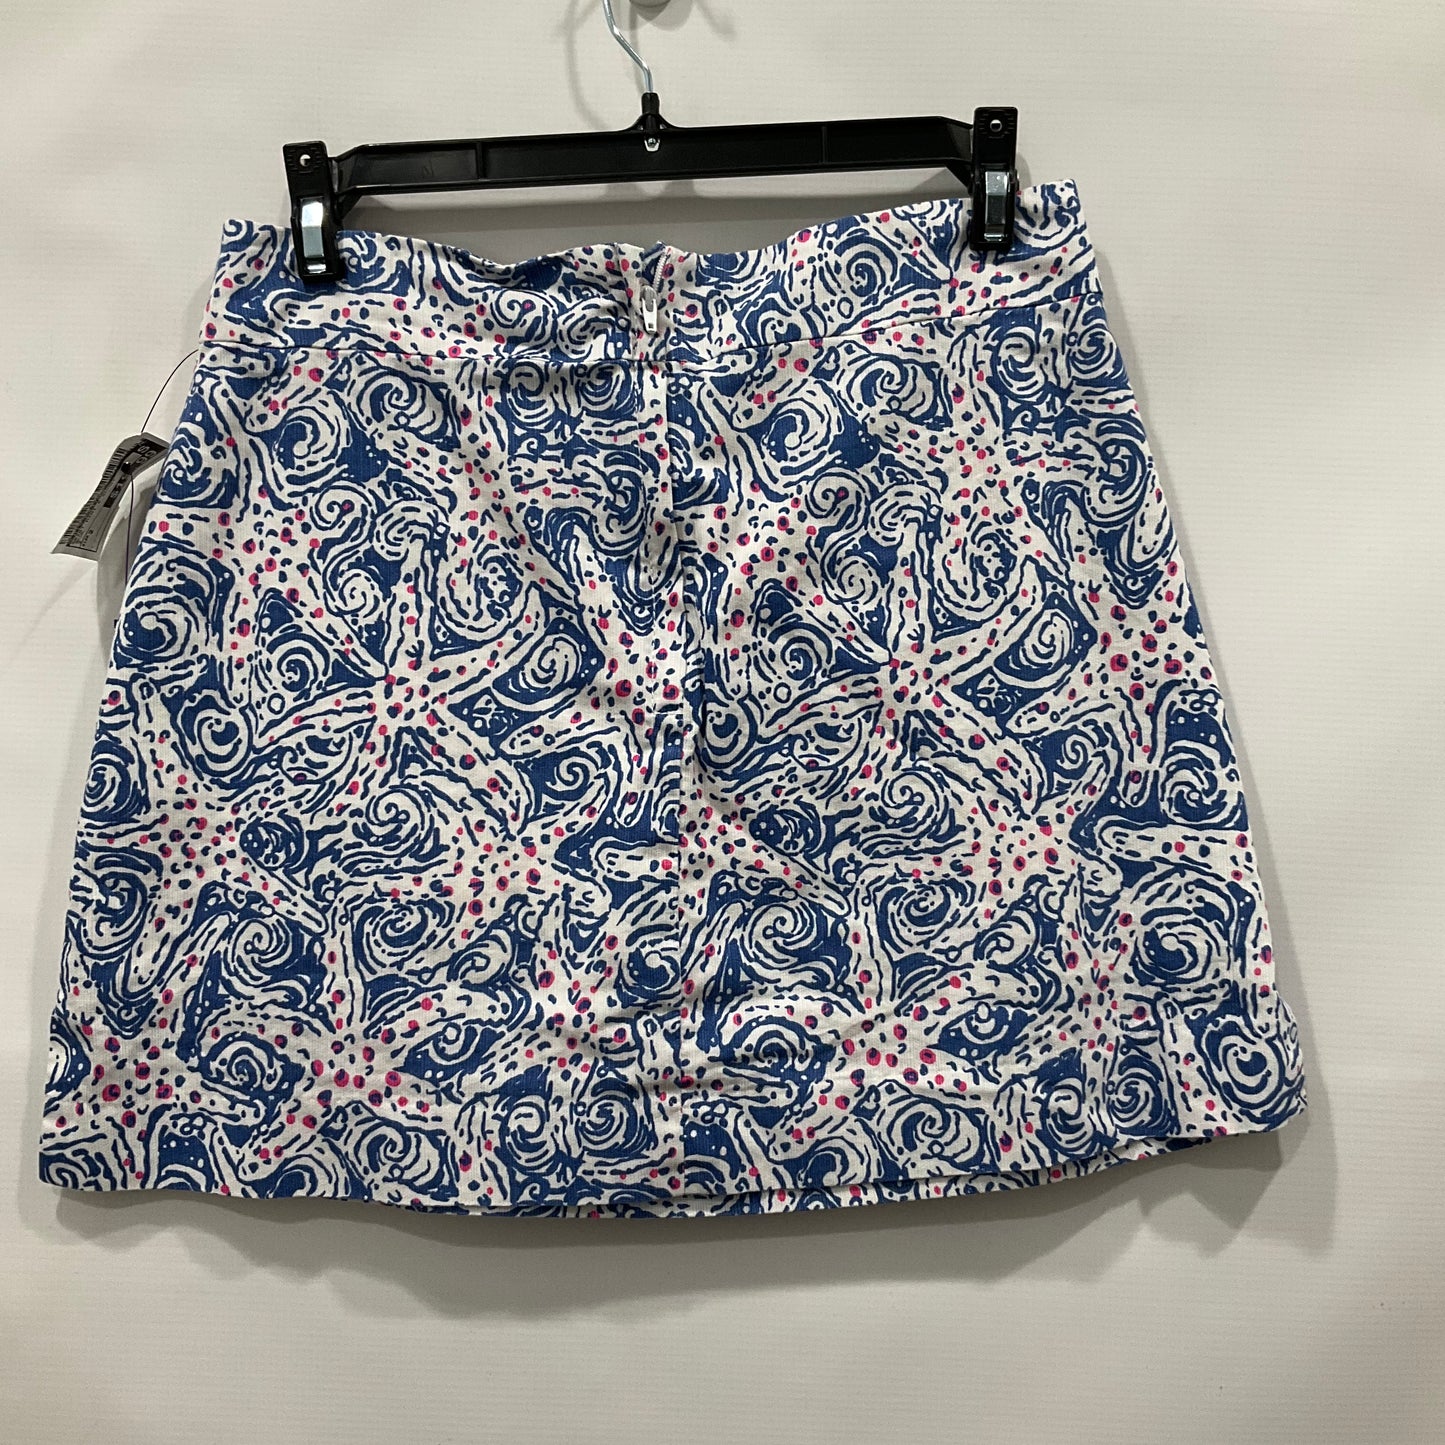 Skirt Mini & Short By Lilly Pulitzer  Size: 2